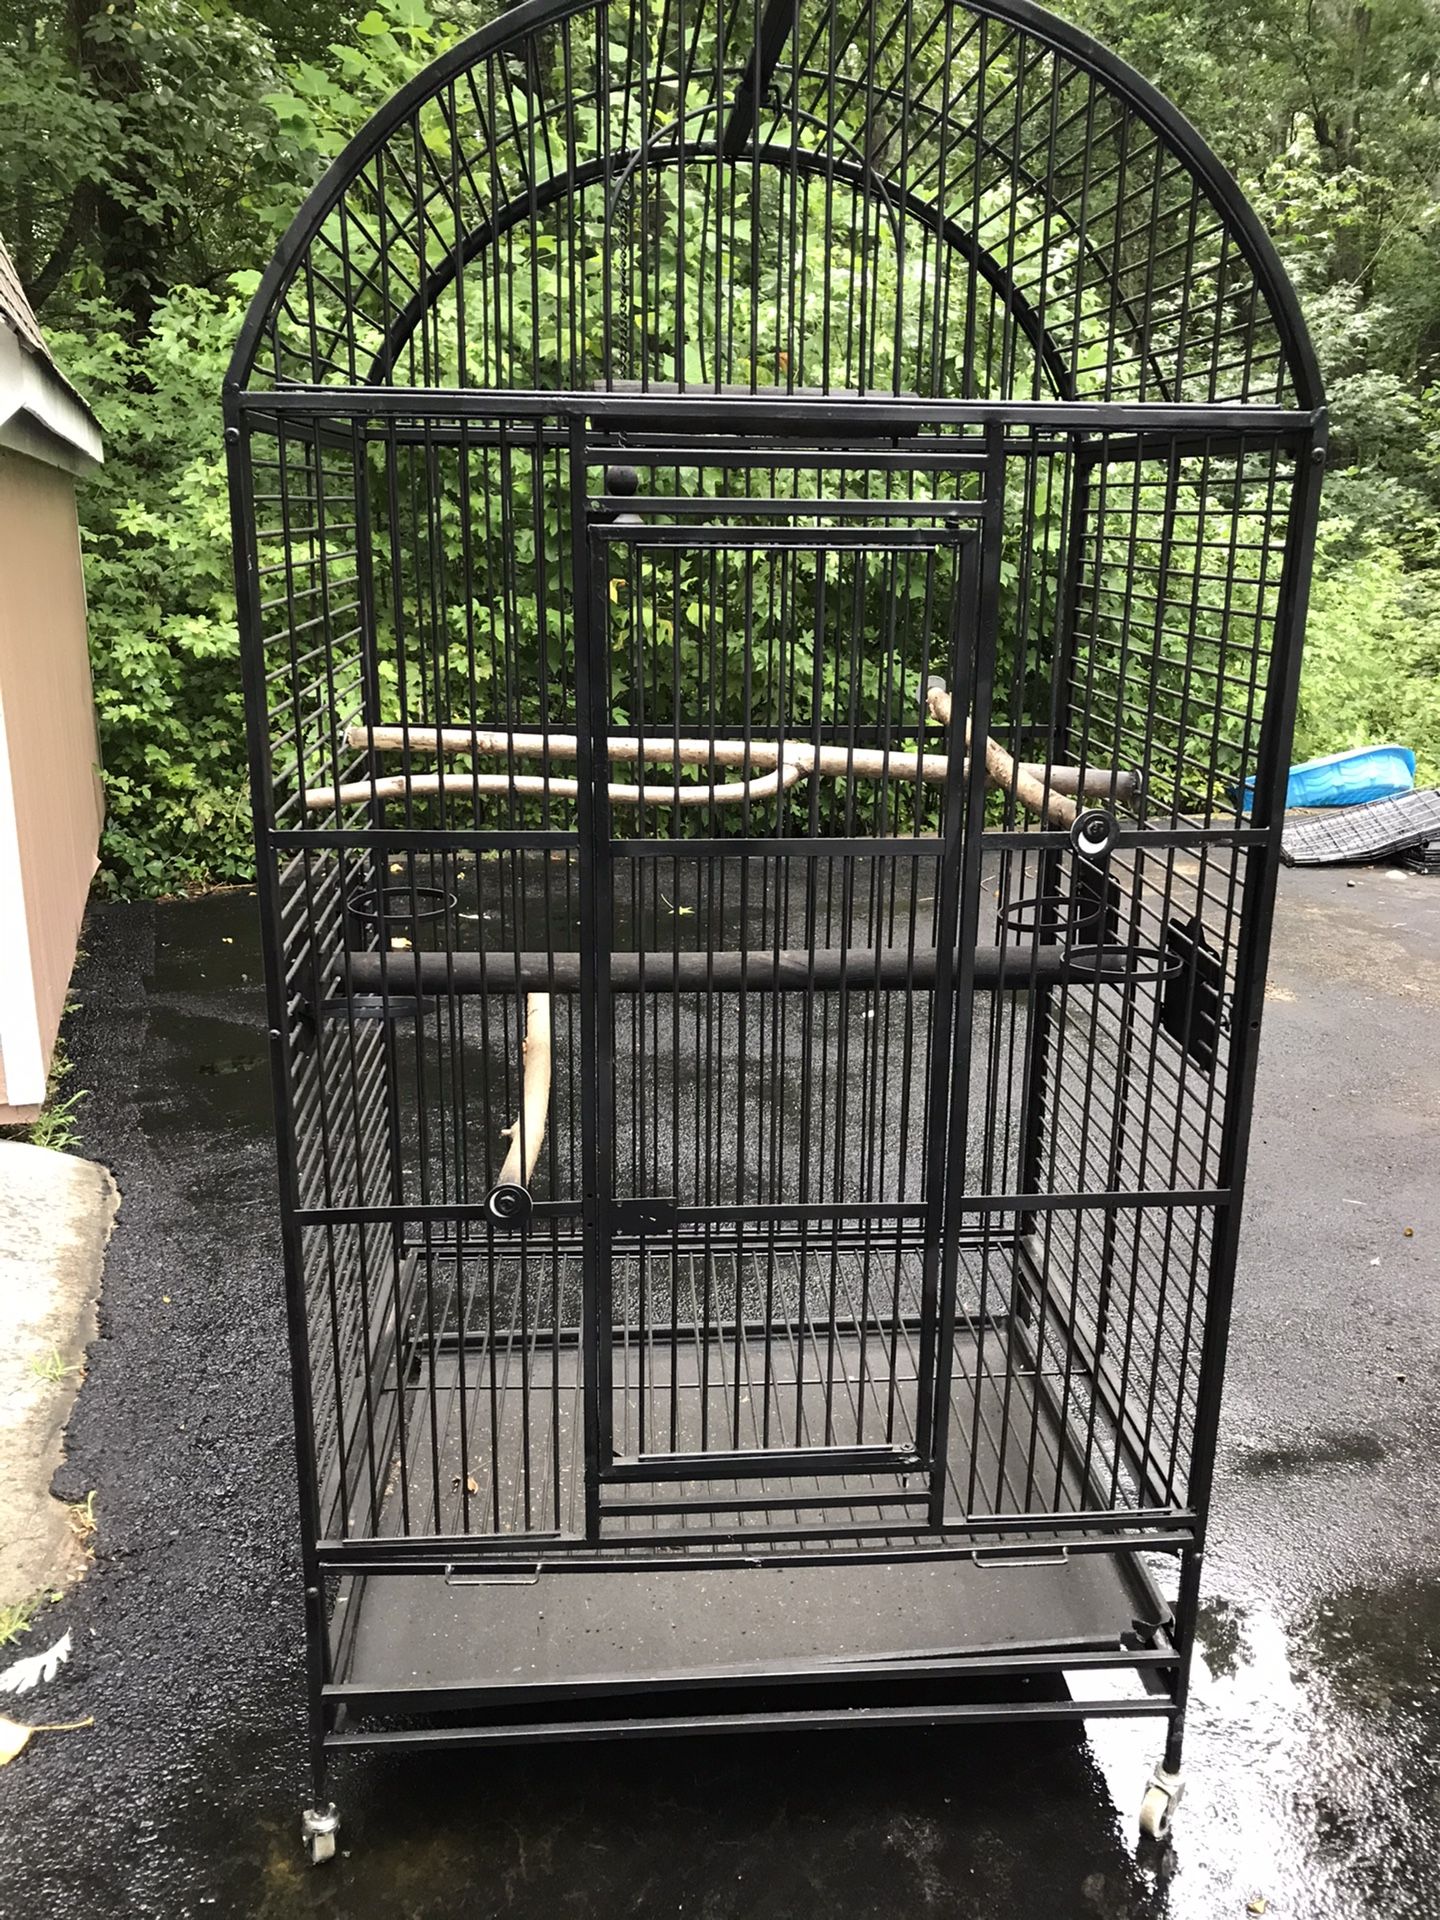 Large painted stainless steel bird cage